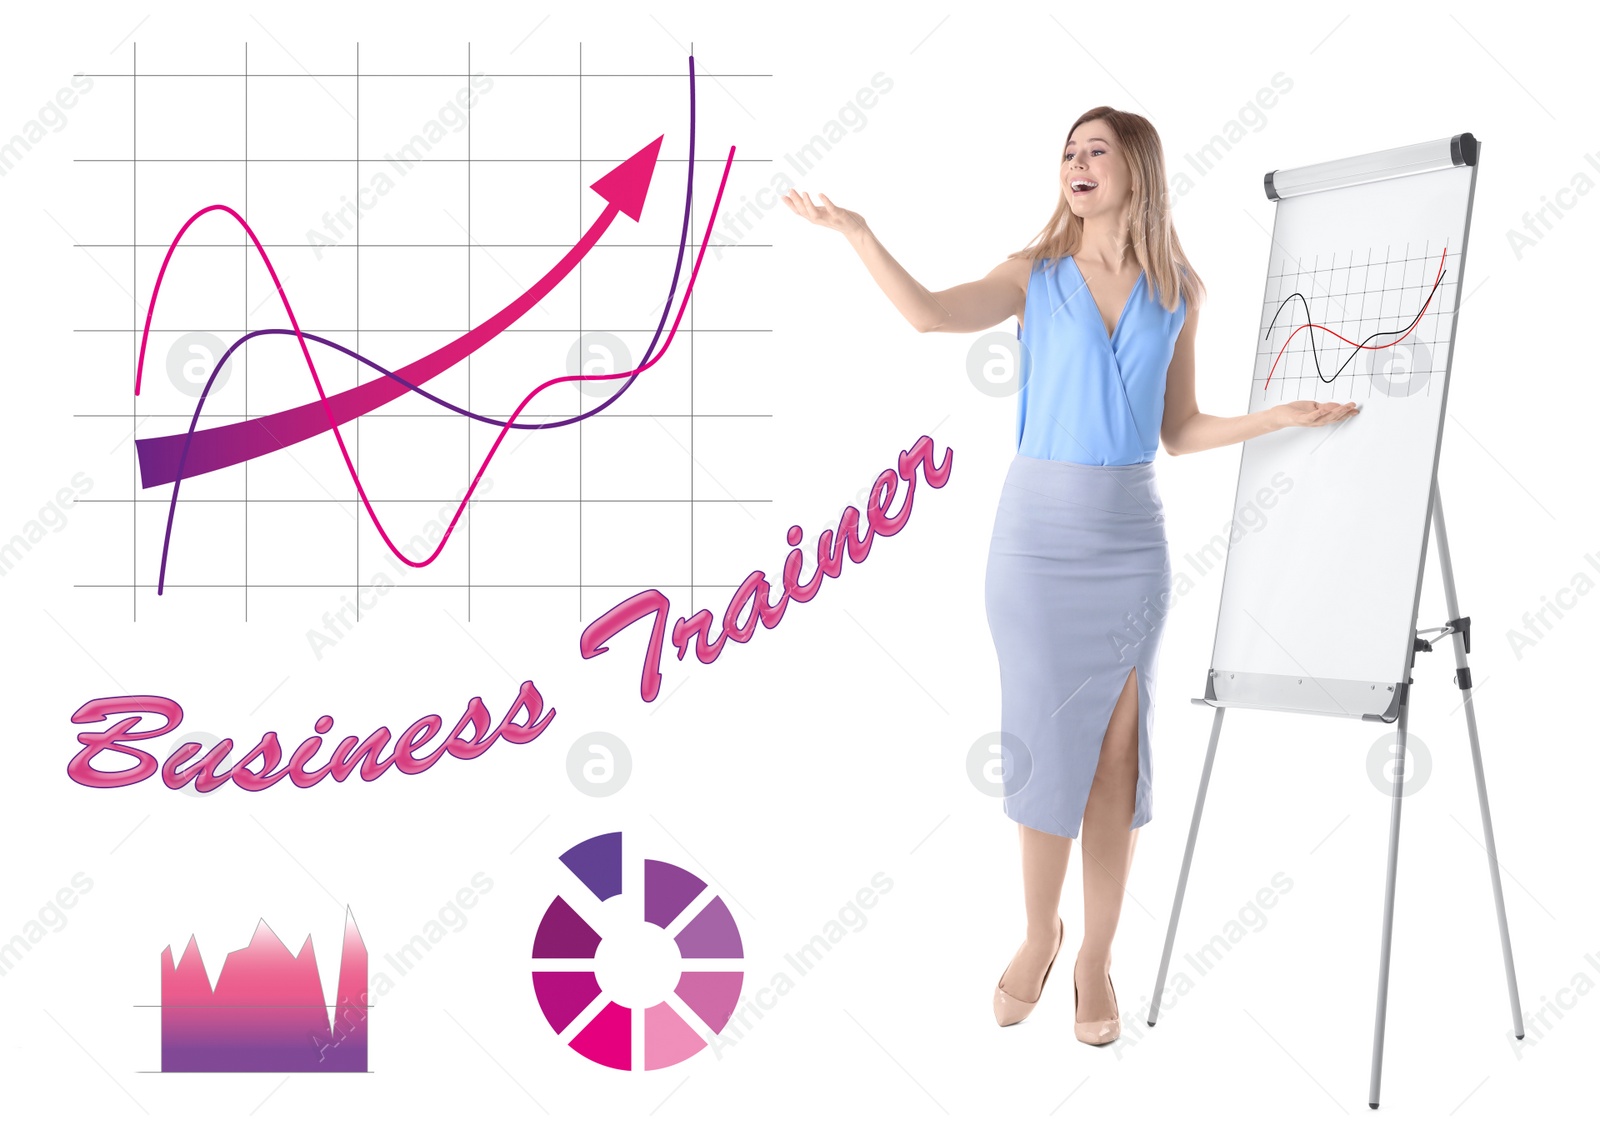 Image of Professional business trainer giving presentation and graphics against white background